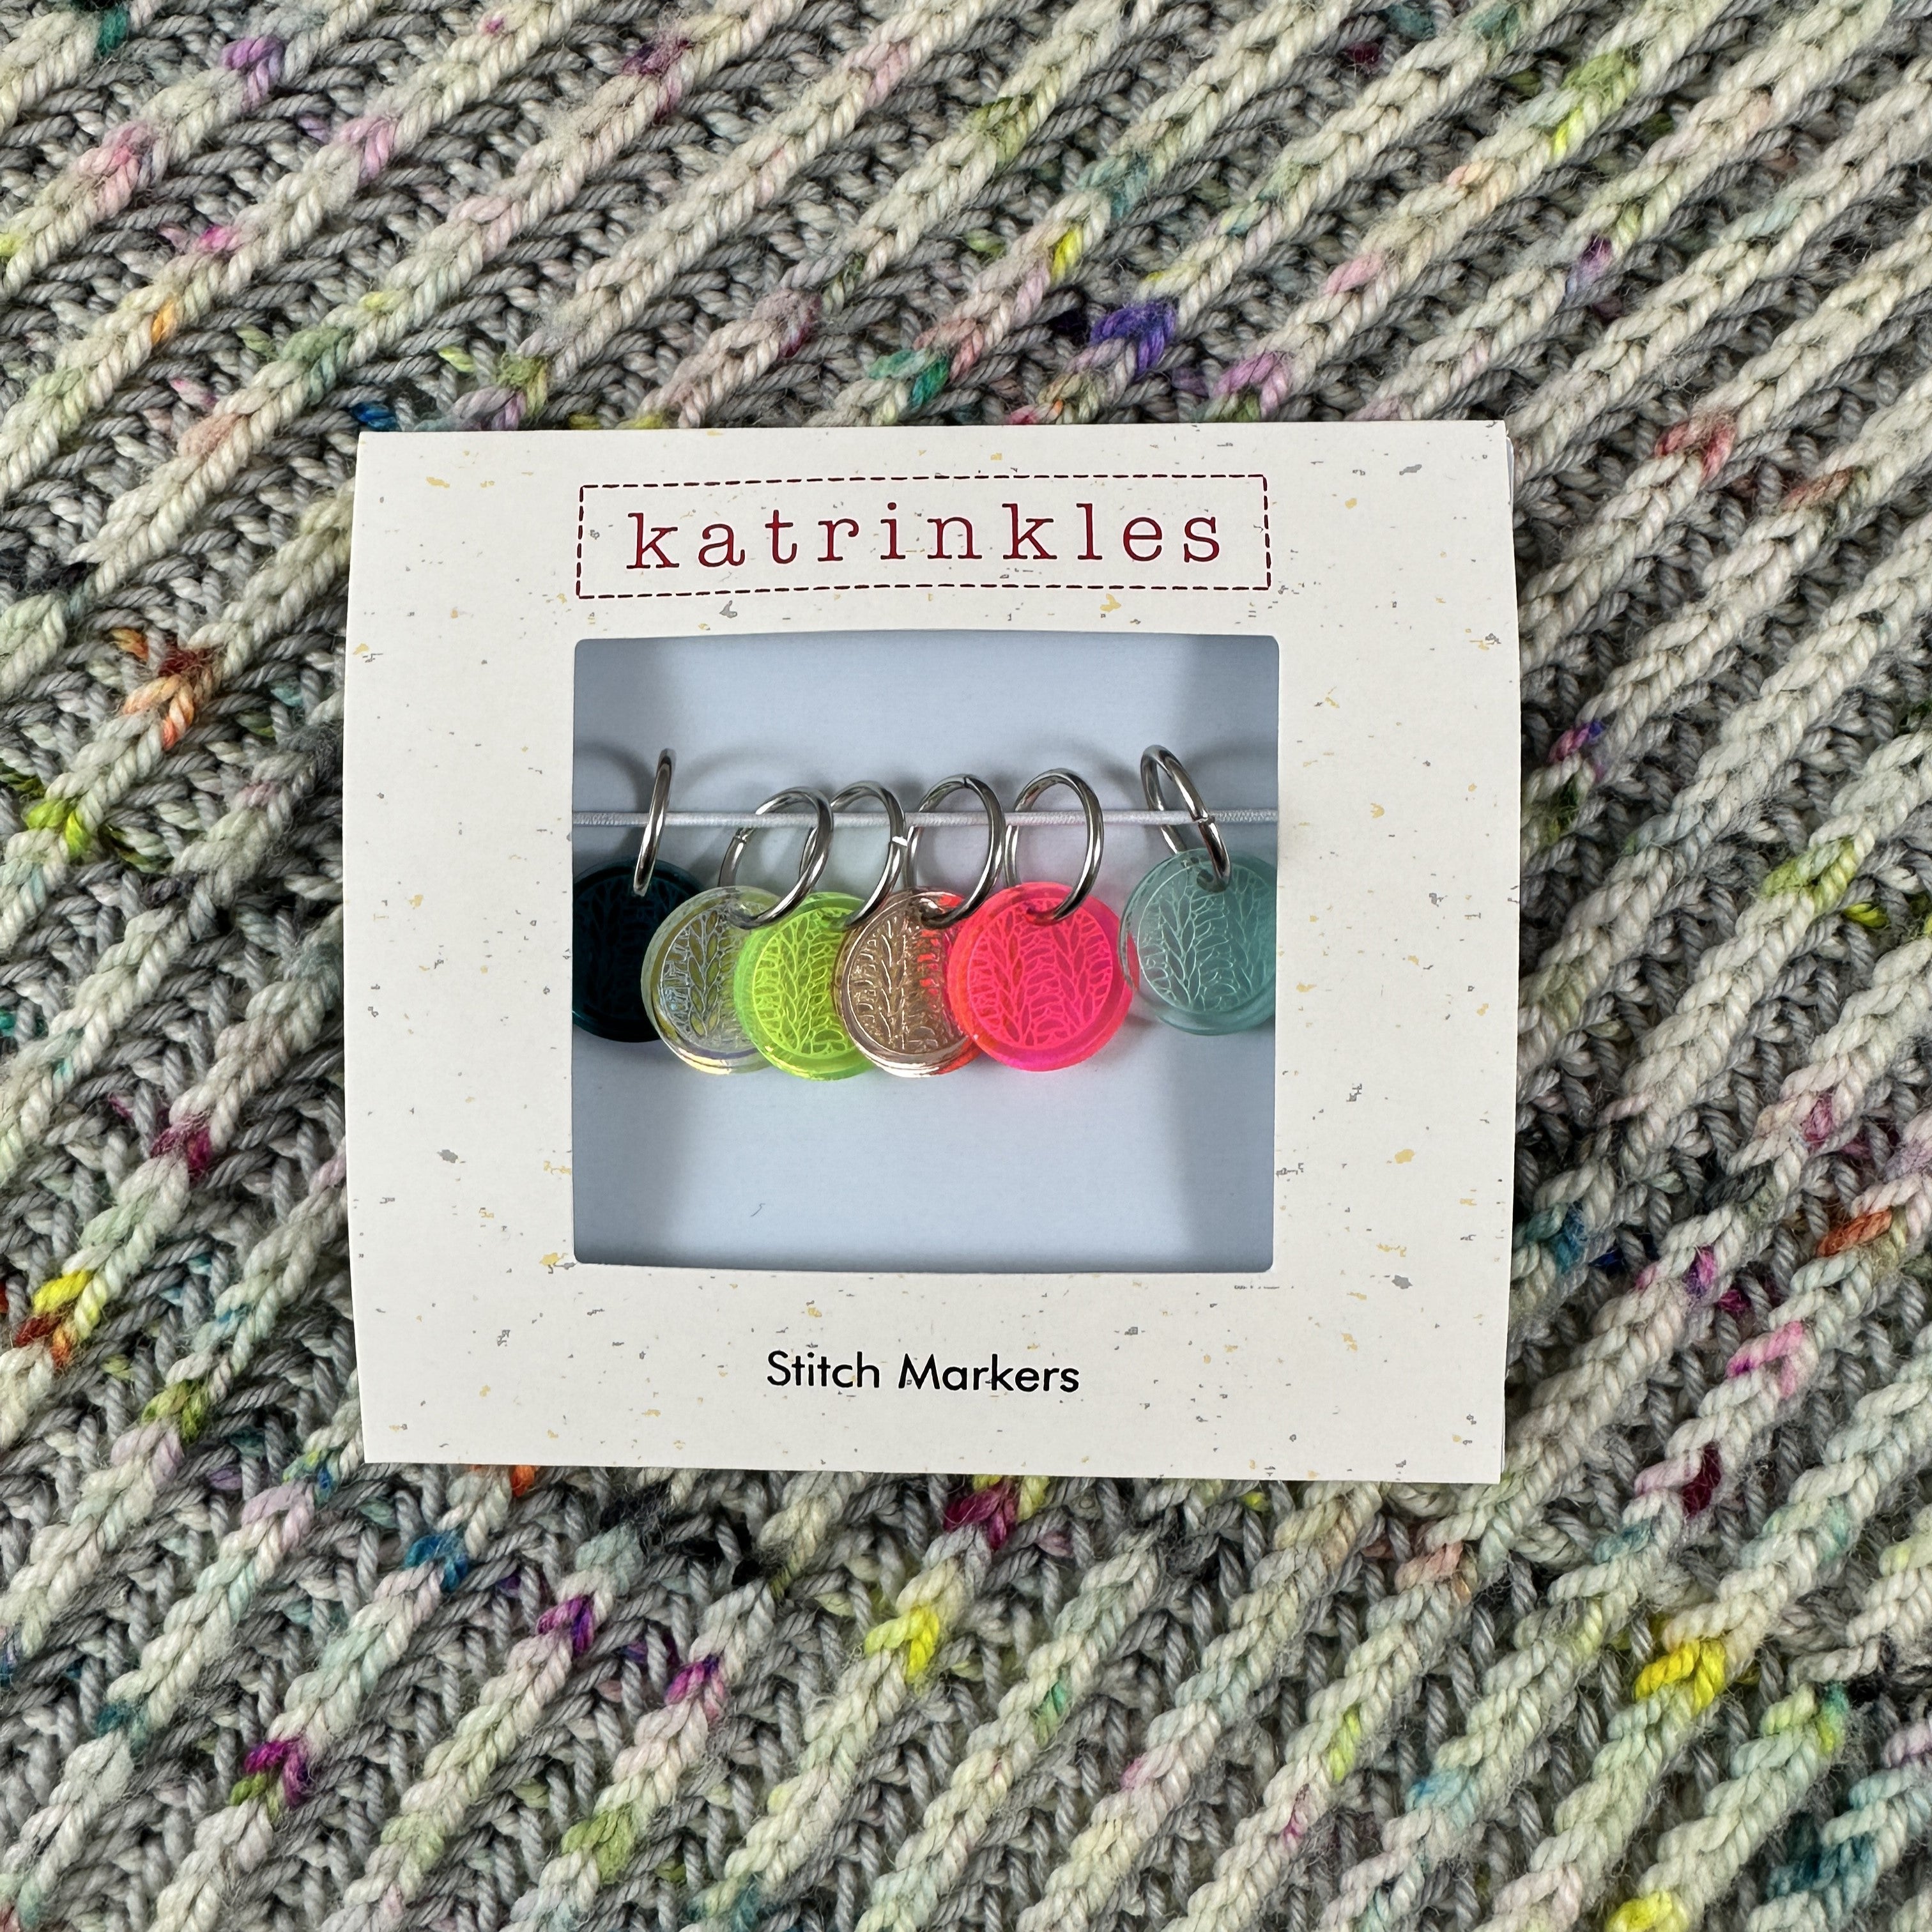 Using Stitch Markers in Knitting - Knit Along Club Foundational Skills